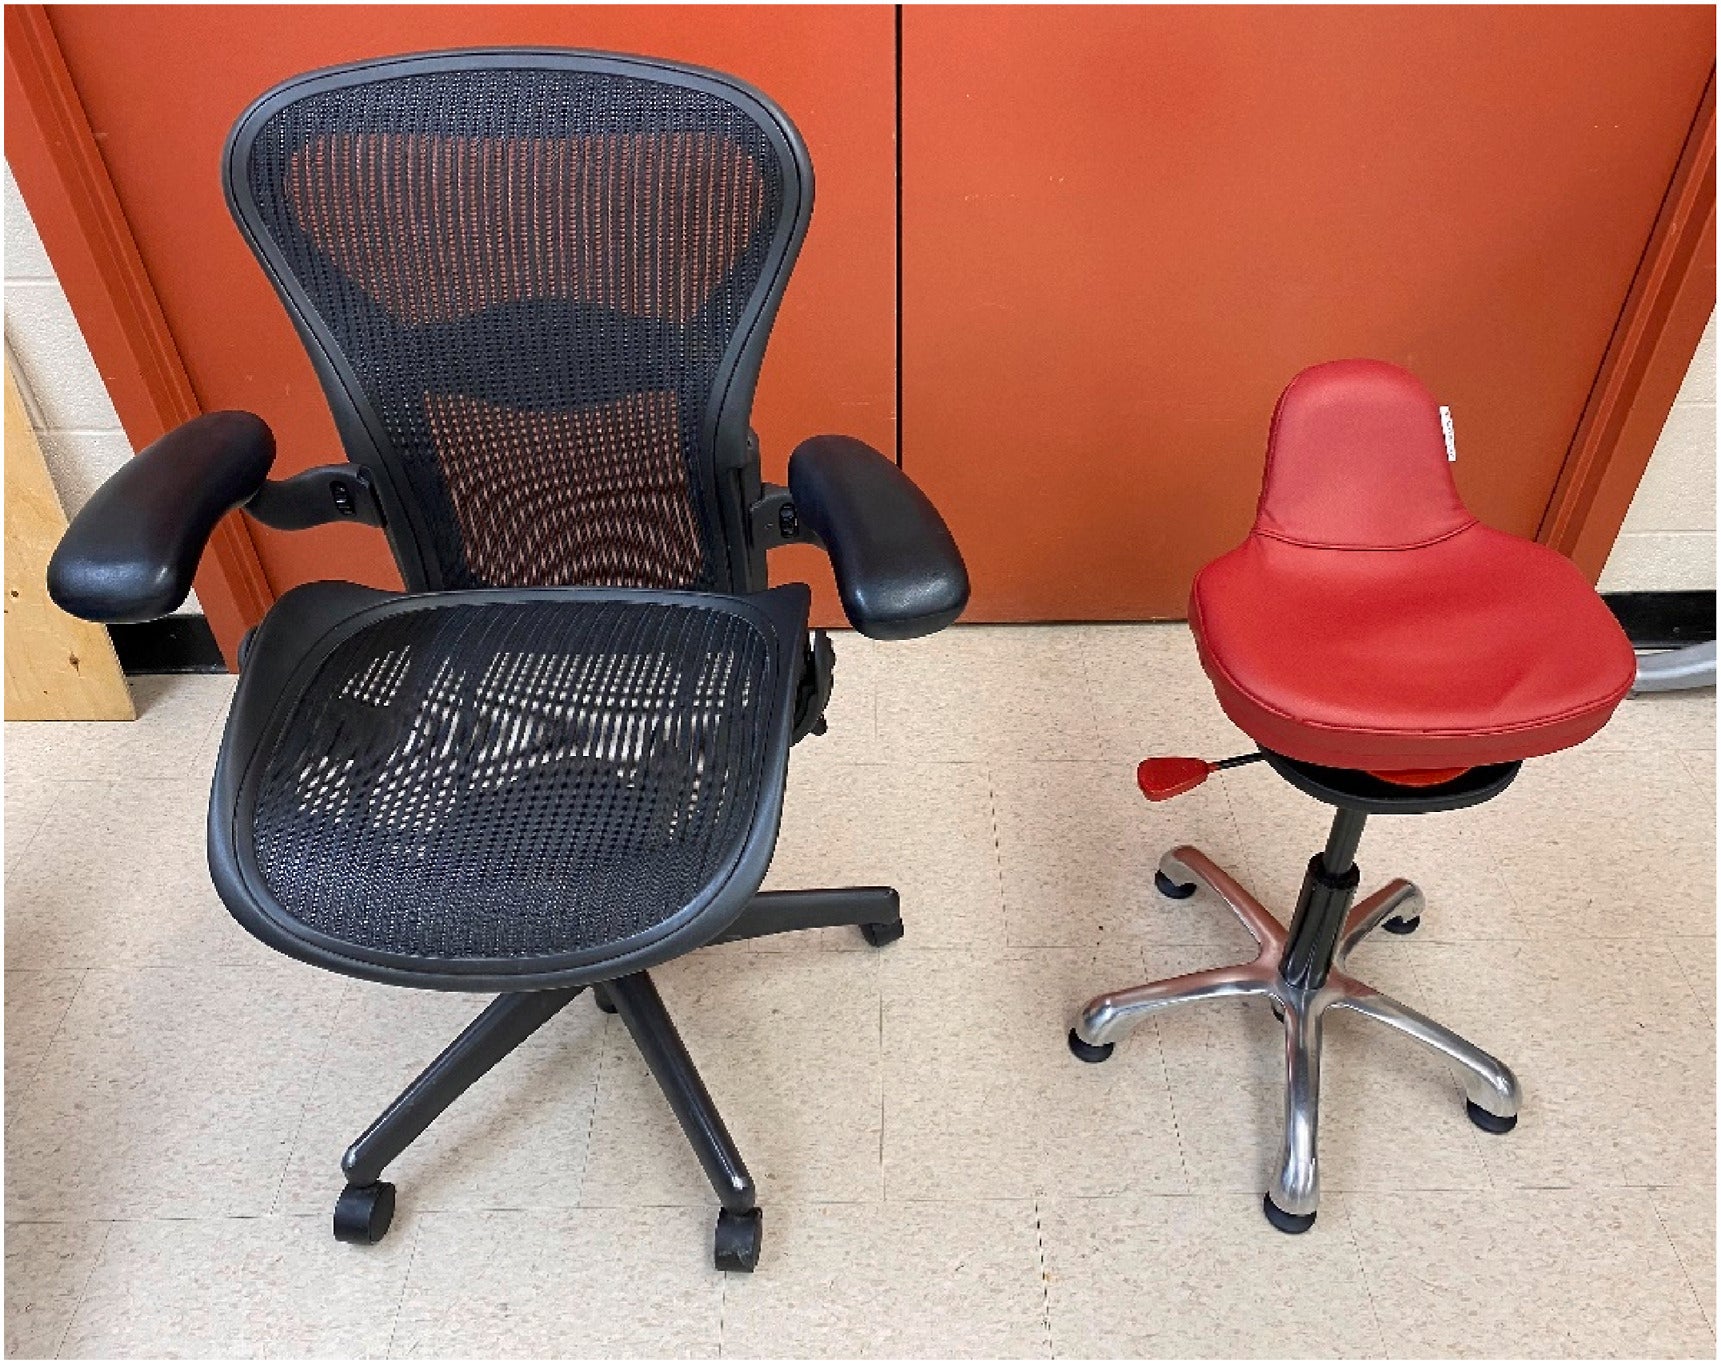 A conventional office chair with arm rests and a back rest next to a backless dynamic chair.